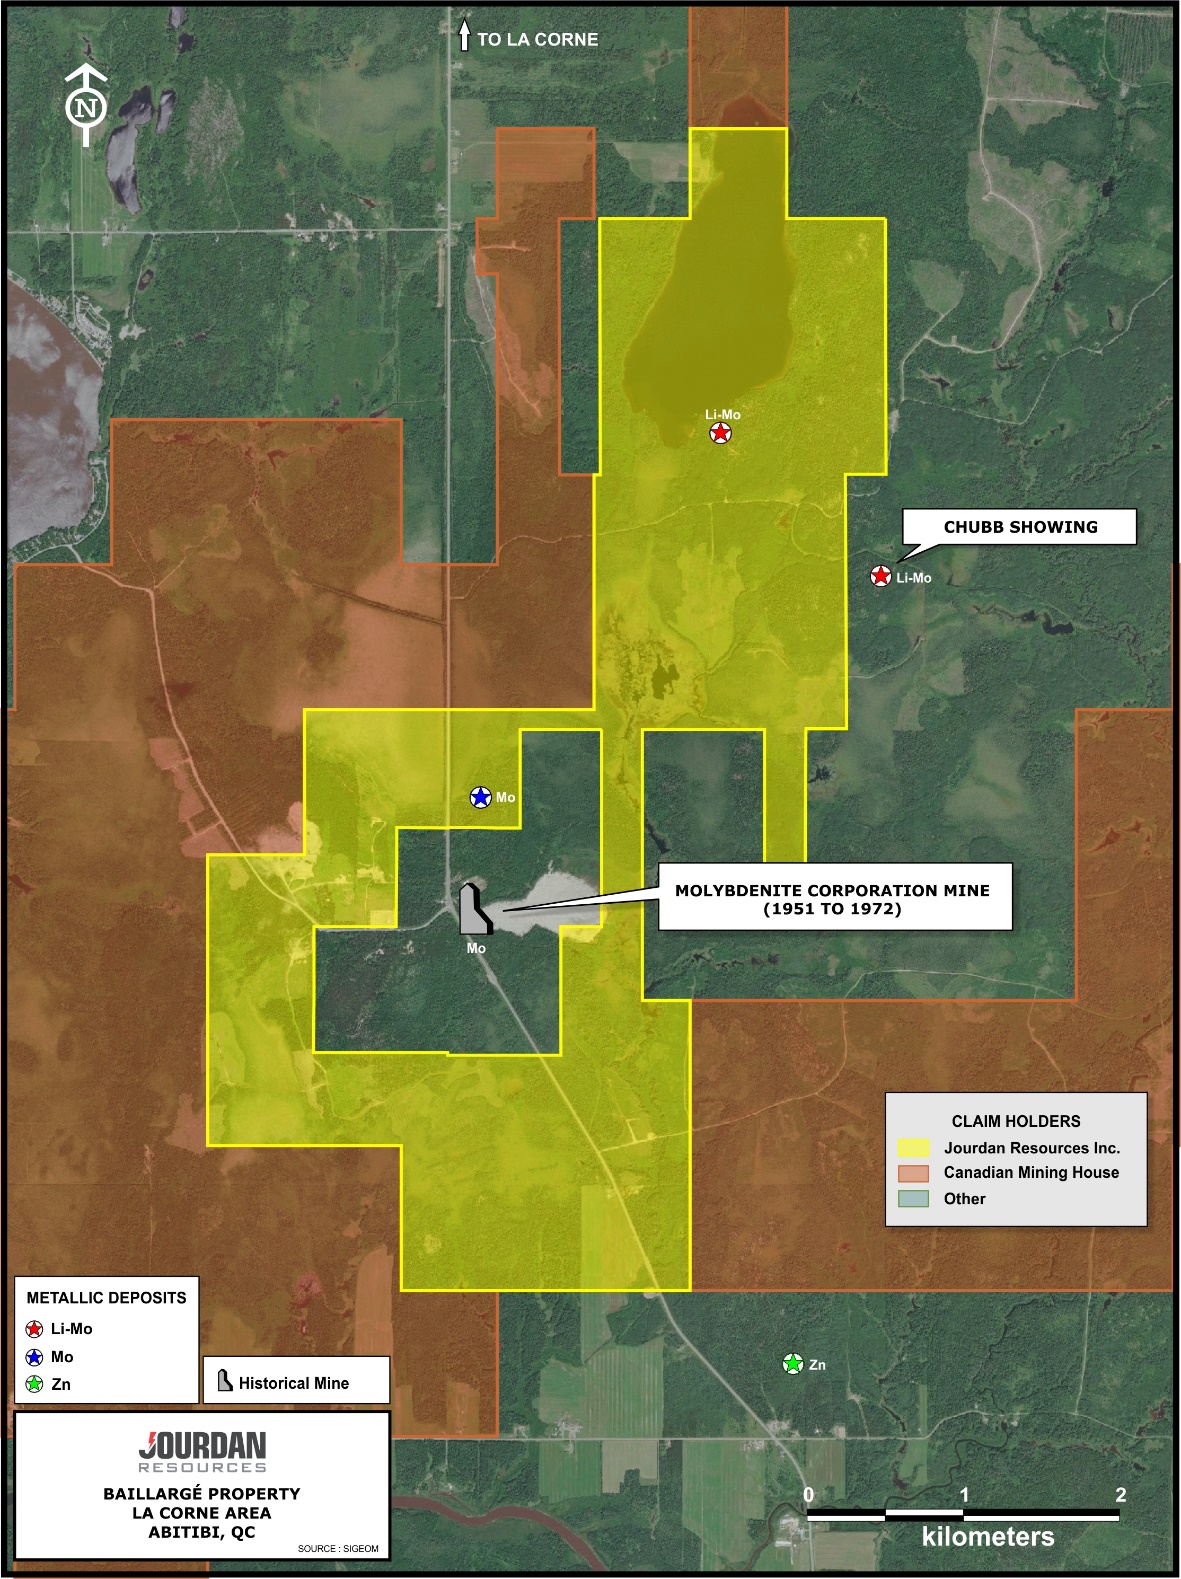 A map with a key showing historic lithium sites